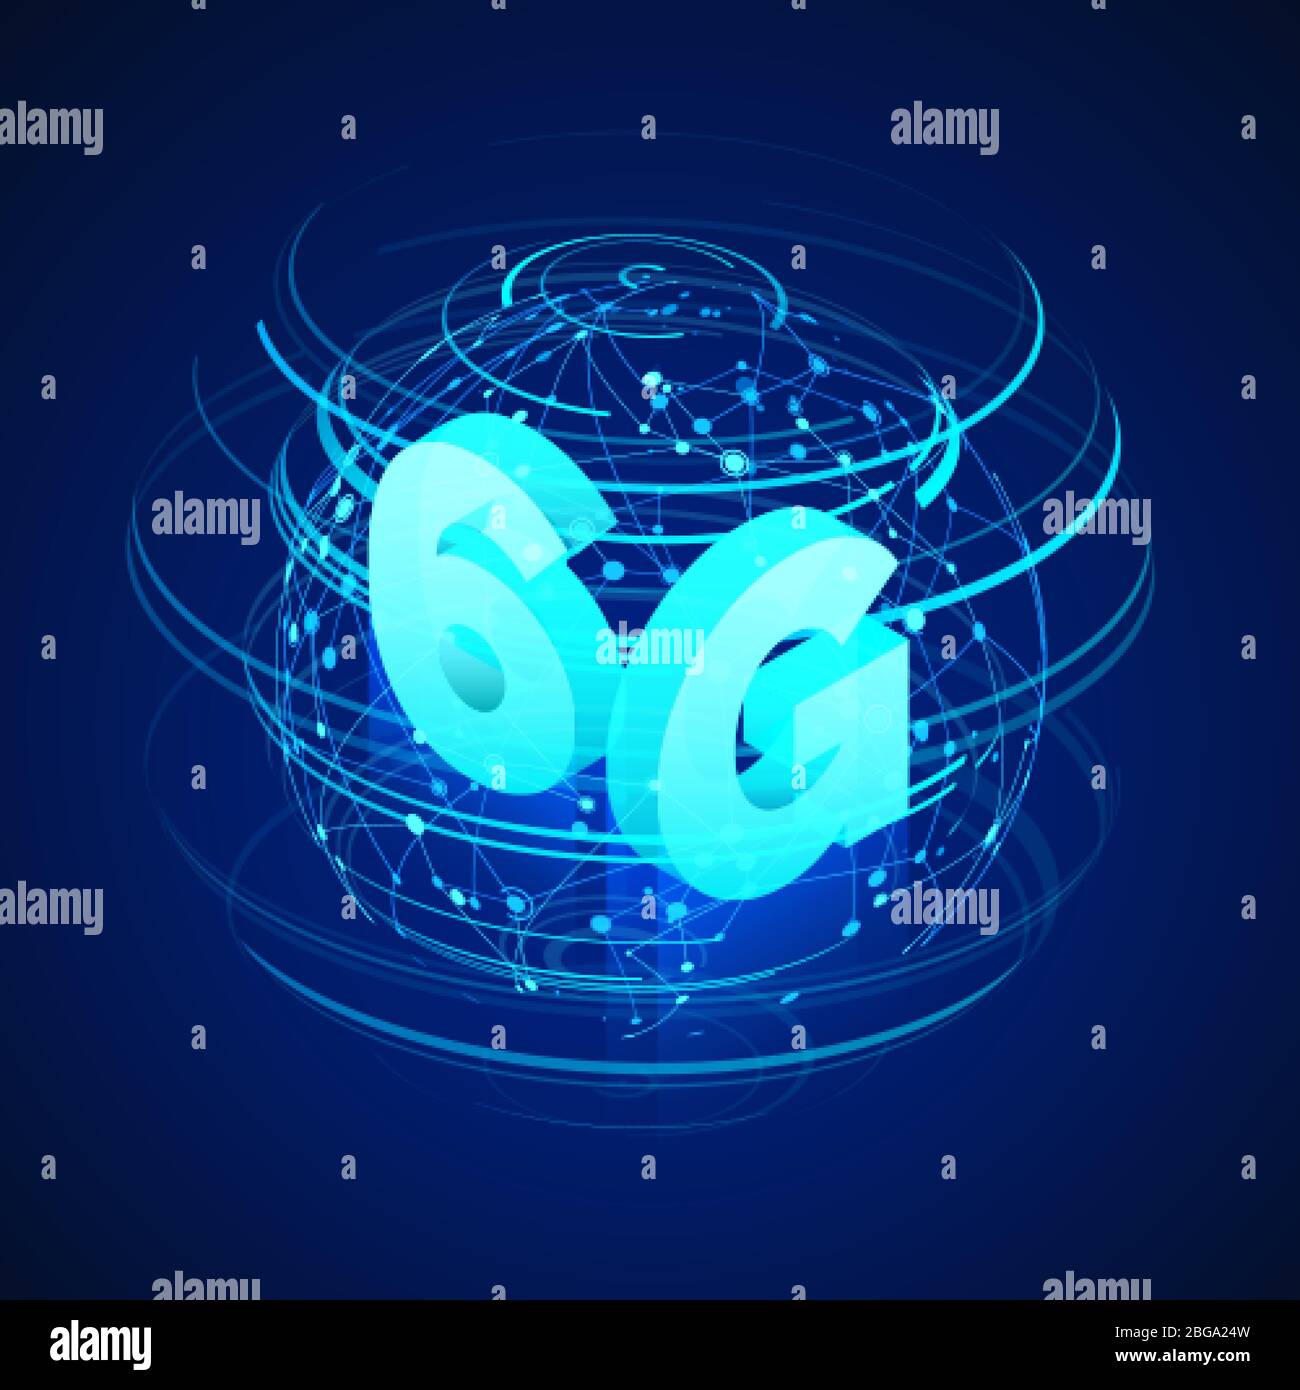 High speed 6G global mobile networks. Business isometric illustration global network hologram and text 6g. Modern data transfer technology. Wireless w Stock Vector